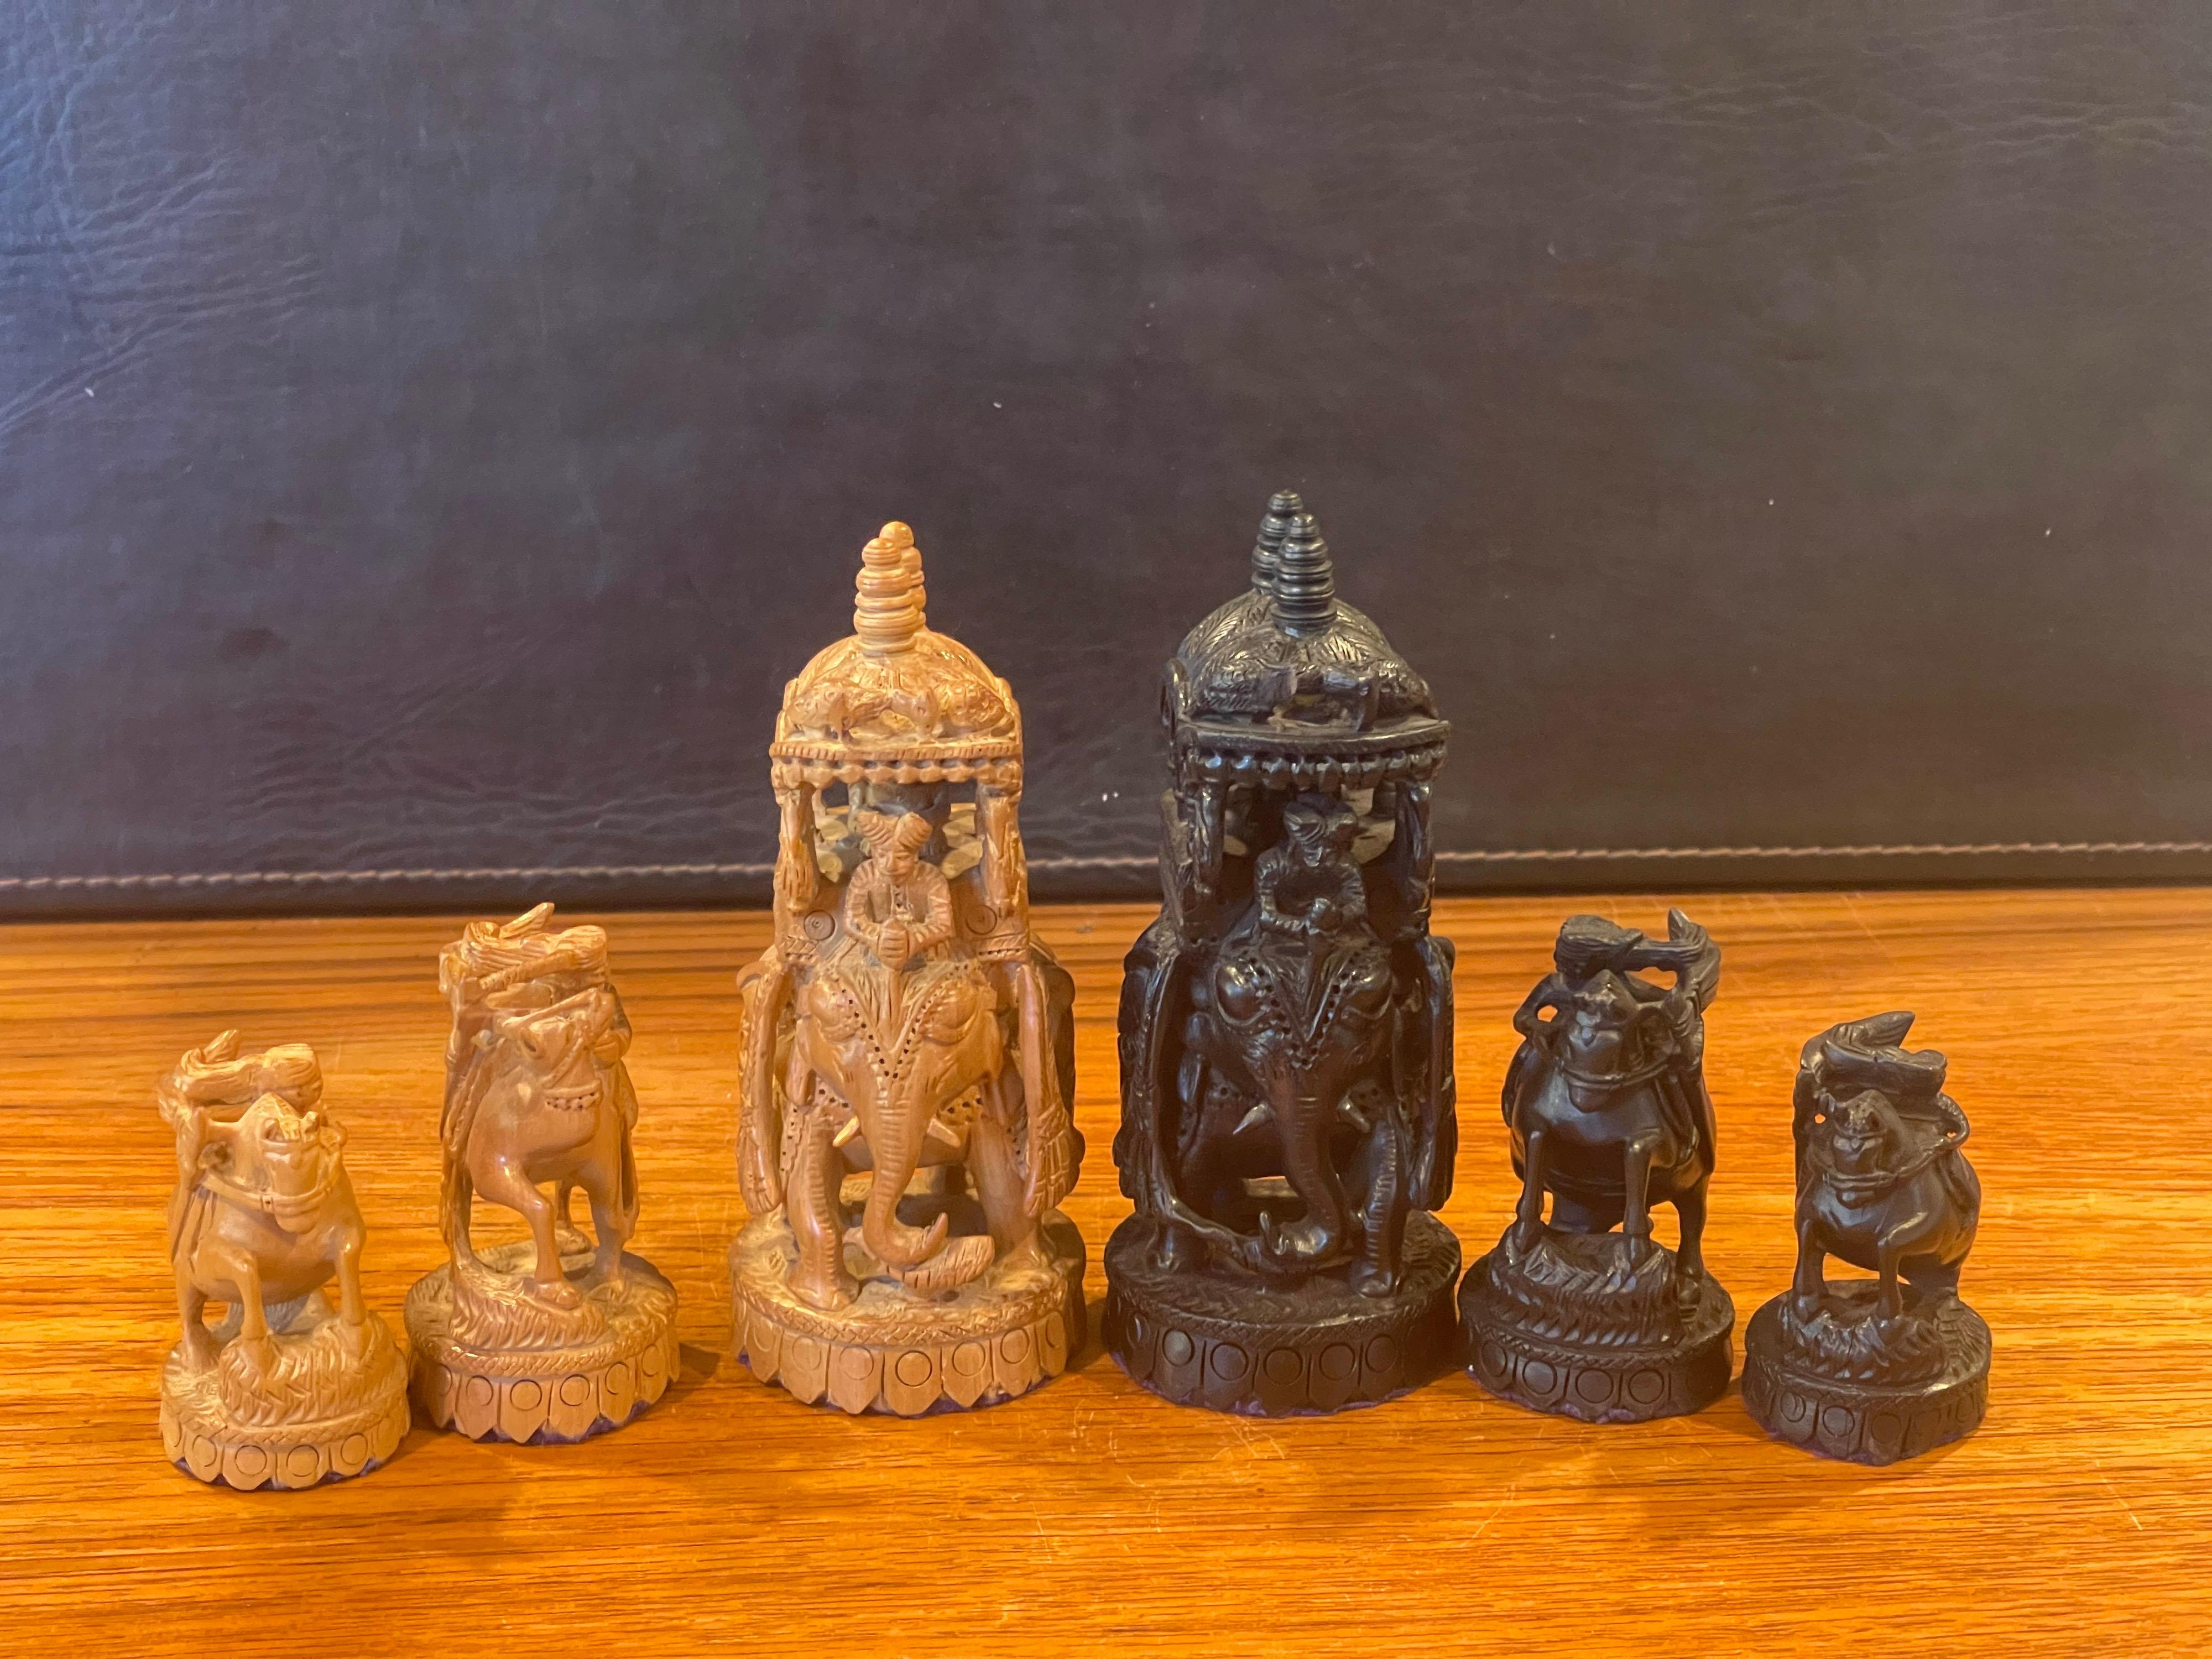 Large Vintage Rajasthani / Indian Chess Set with Board For Sale 9